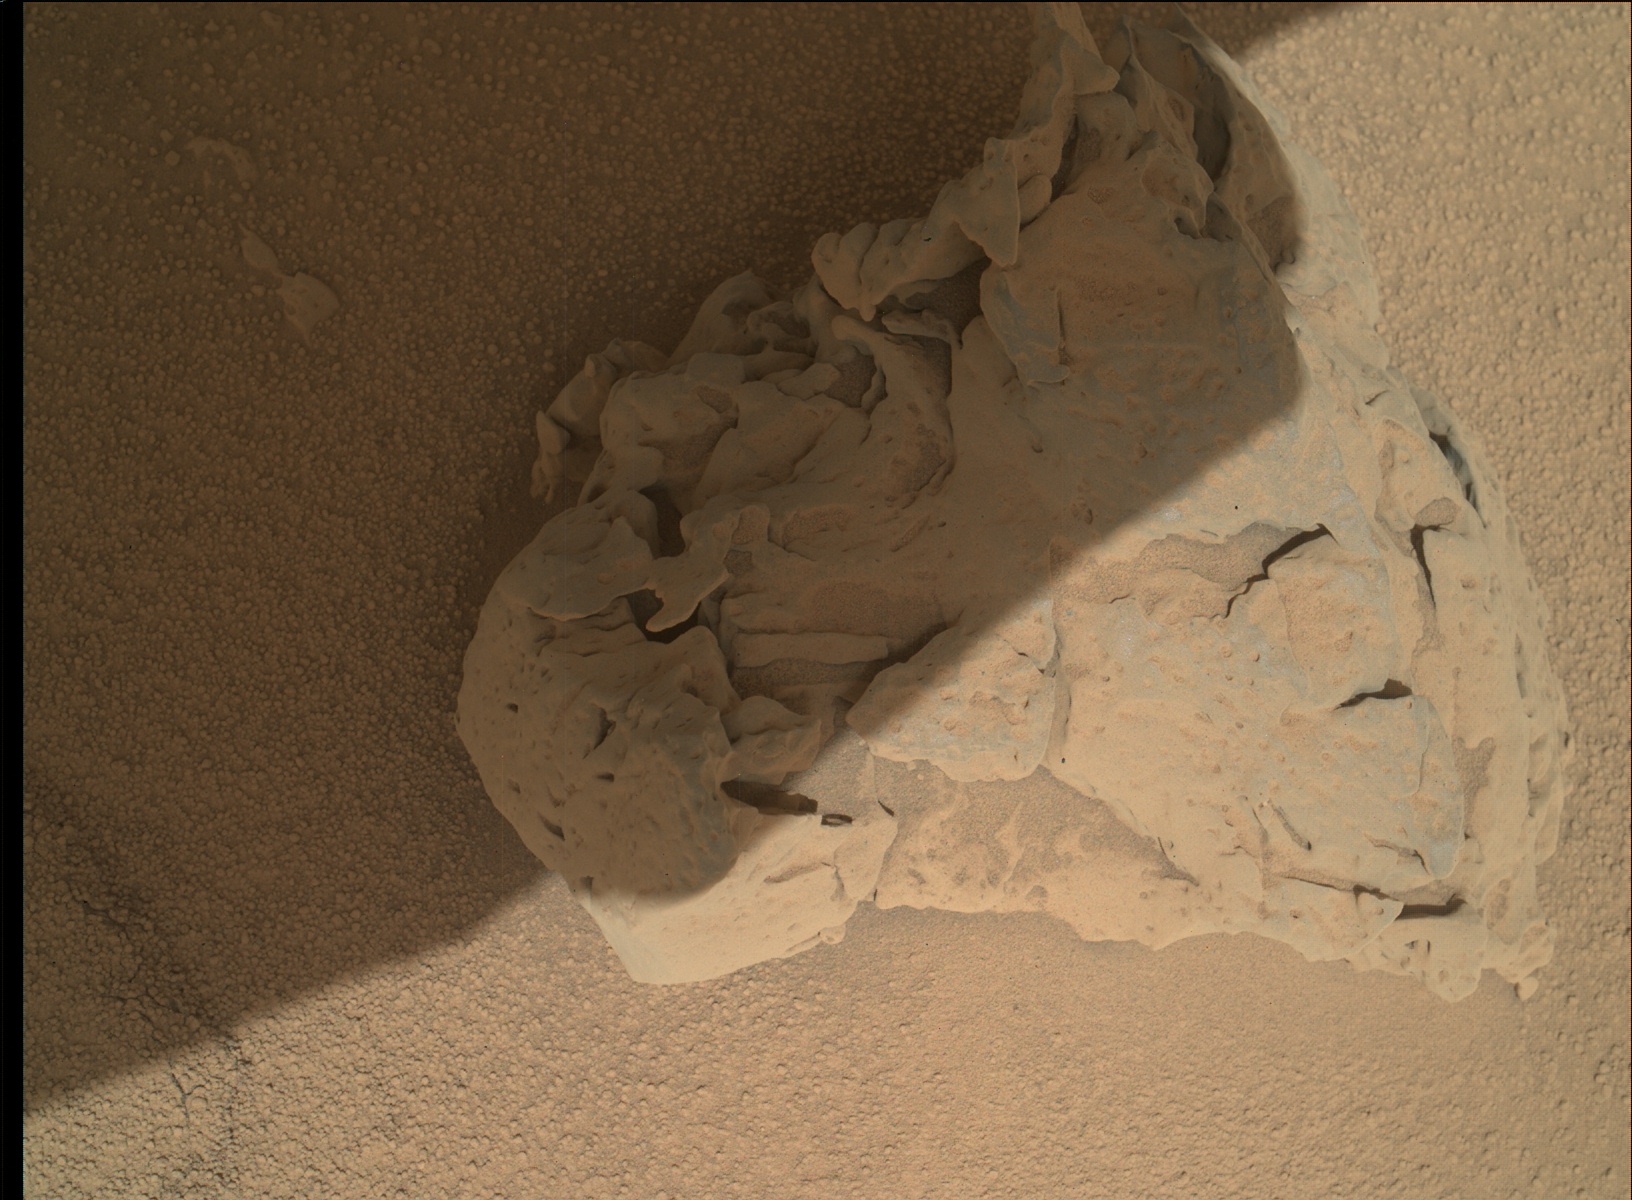 Nasa's Mars rover Curiosity acquired this image using its Mars Hand Lens Imager (MAHLI) on Sol 82